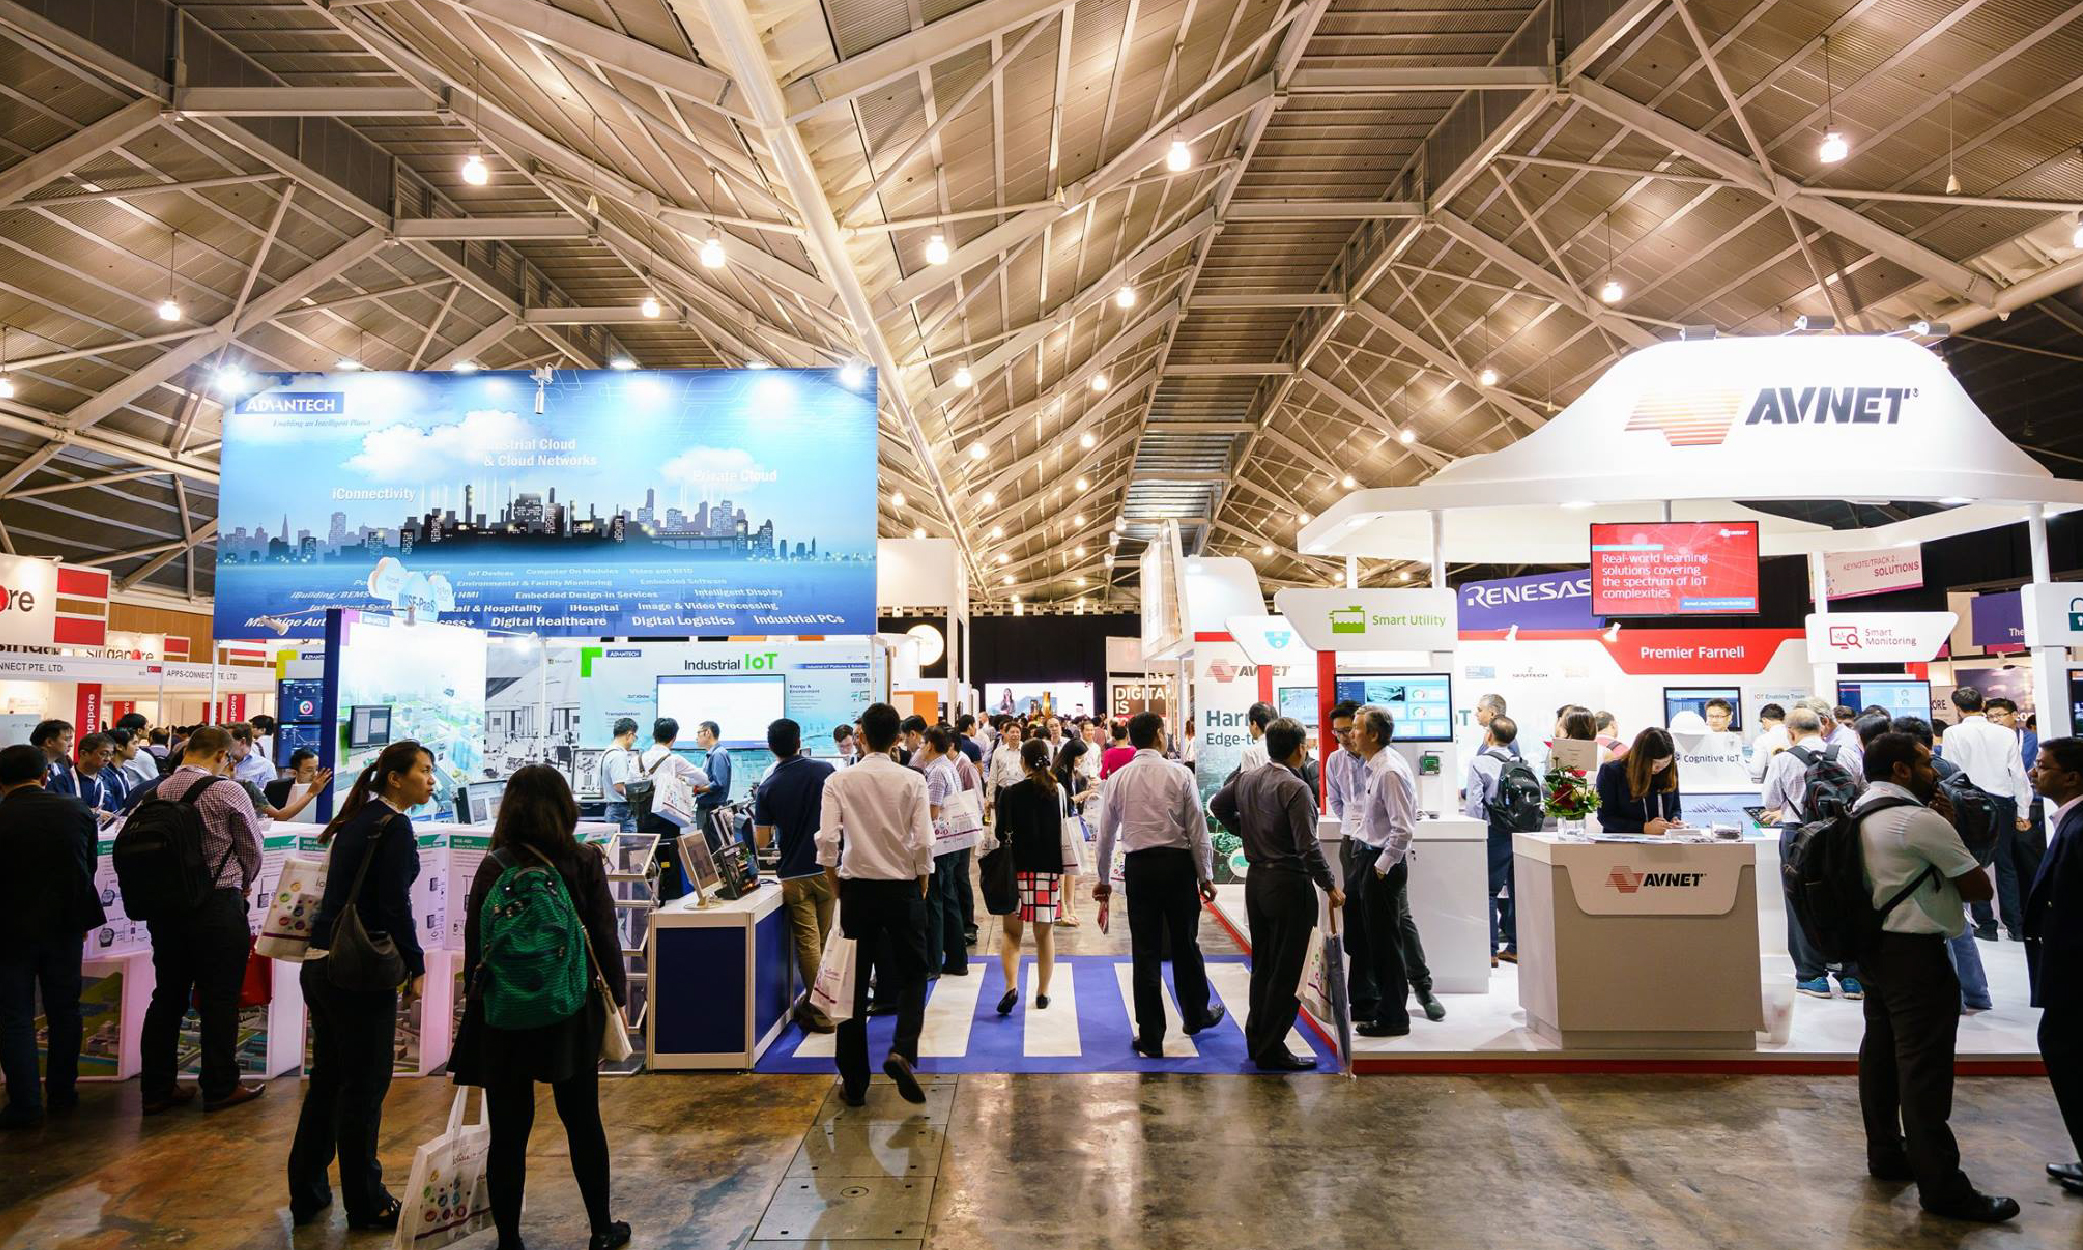 inteliLIGHT® streetlight control uses Sigfox communication during IoT Expo Asia in Singapore, March 2018